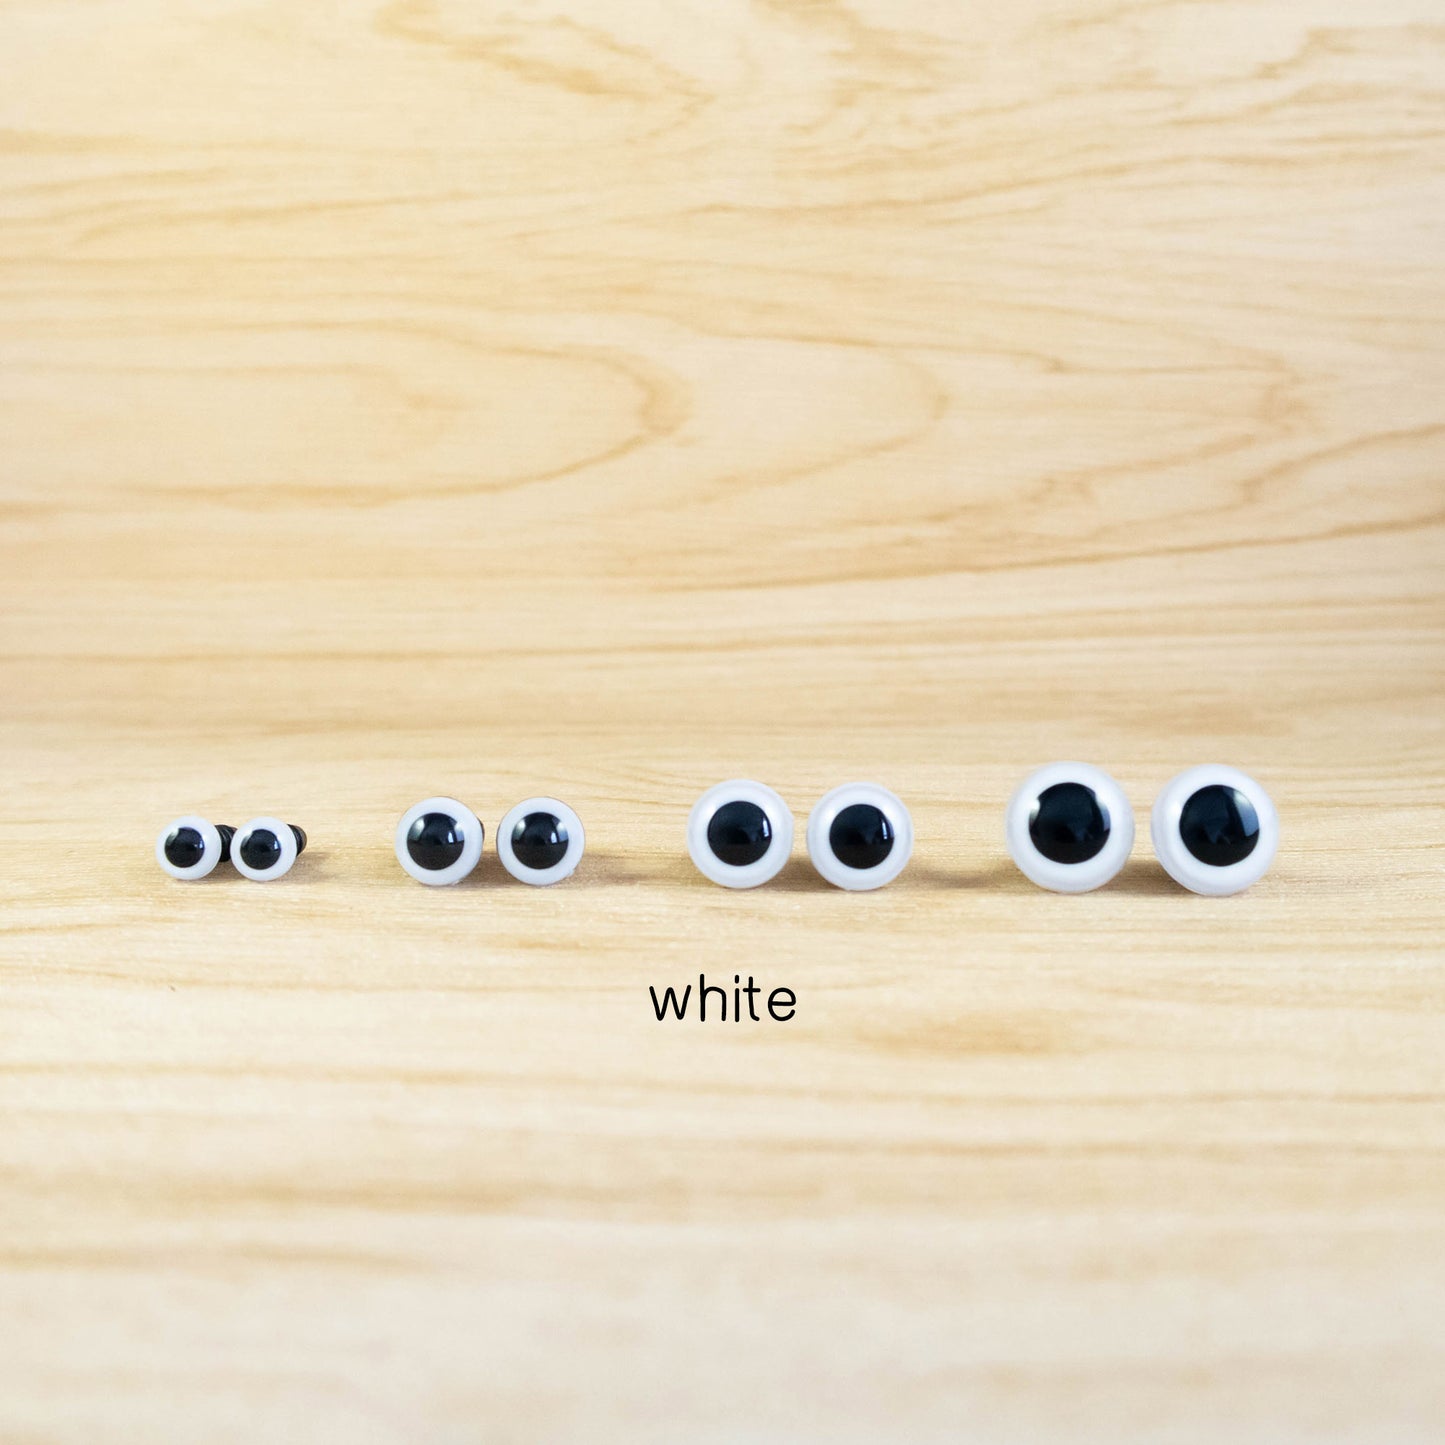 White Safety eyes for handmade projects